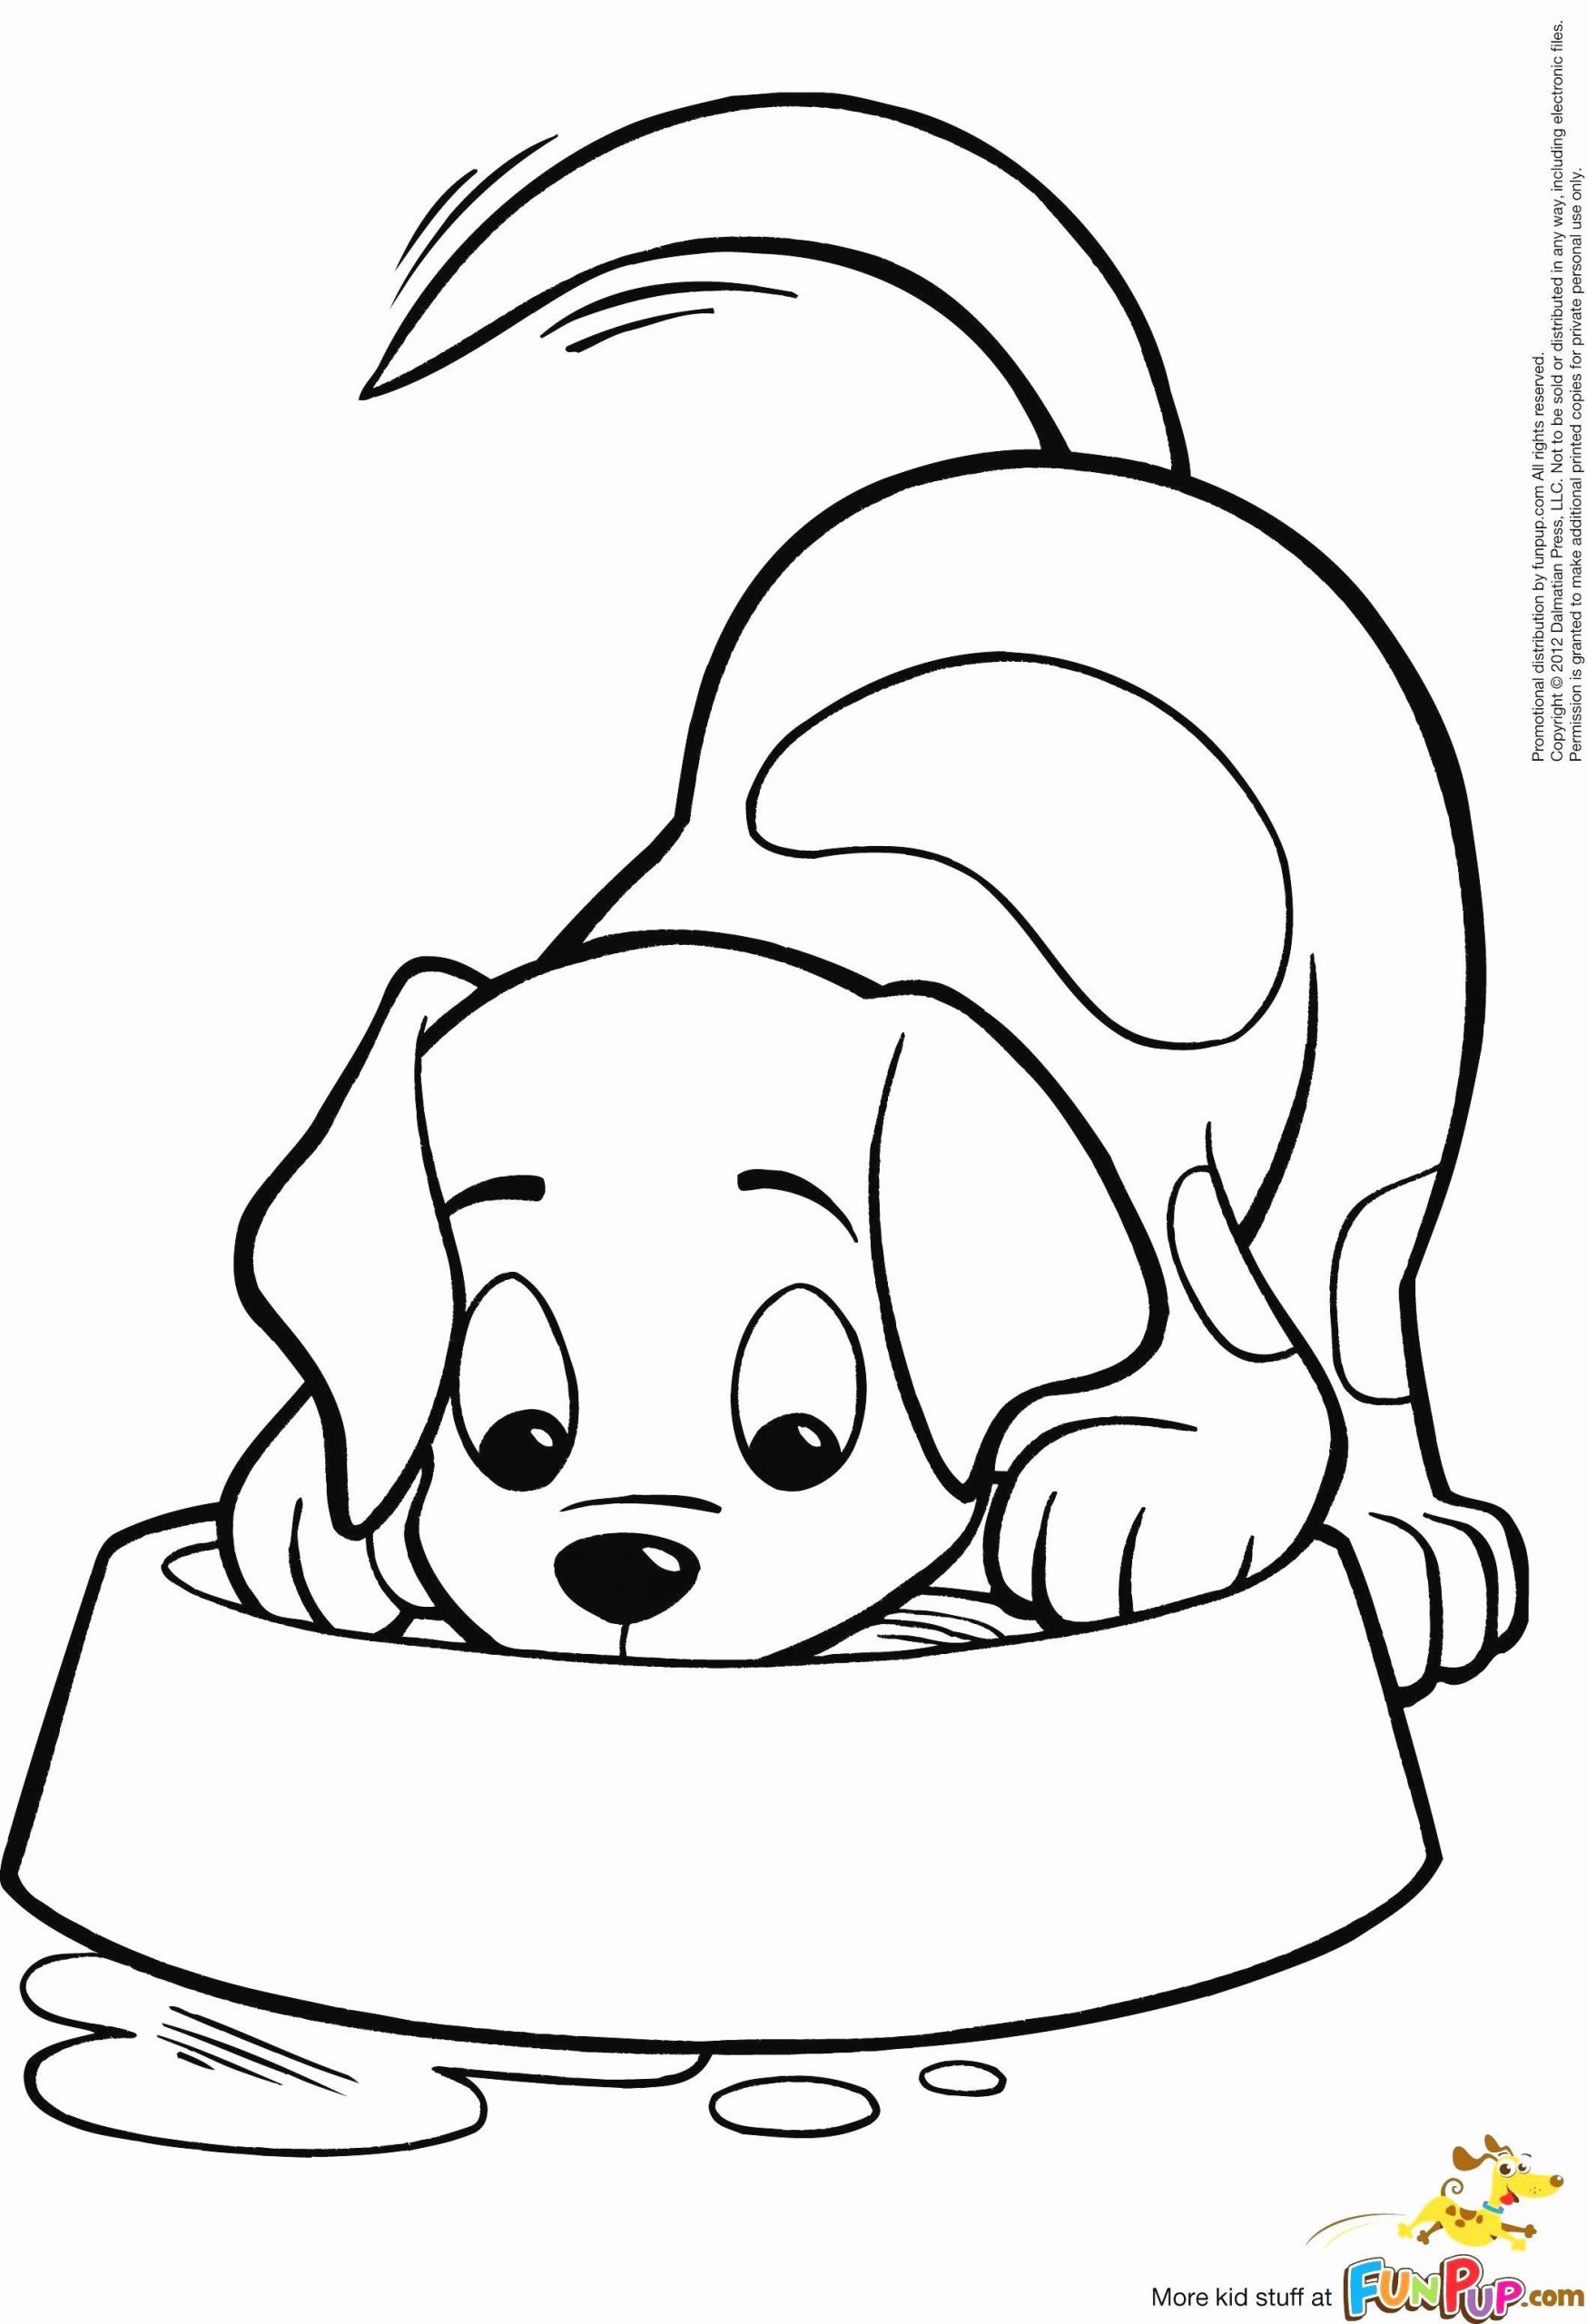 coloring pages : Free Printable Coloring Books For Kids Unique Dog ...